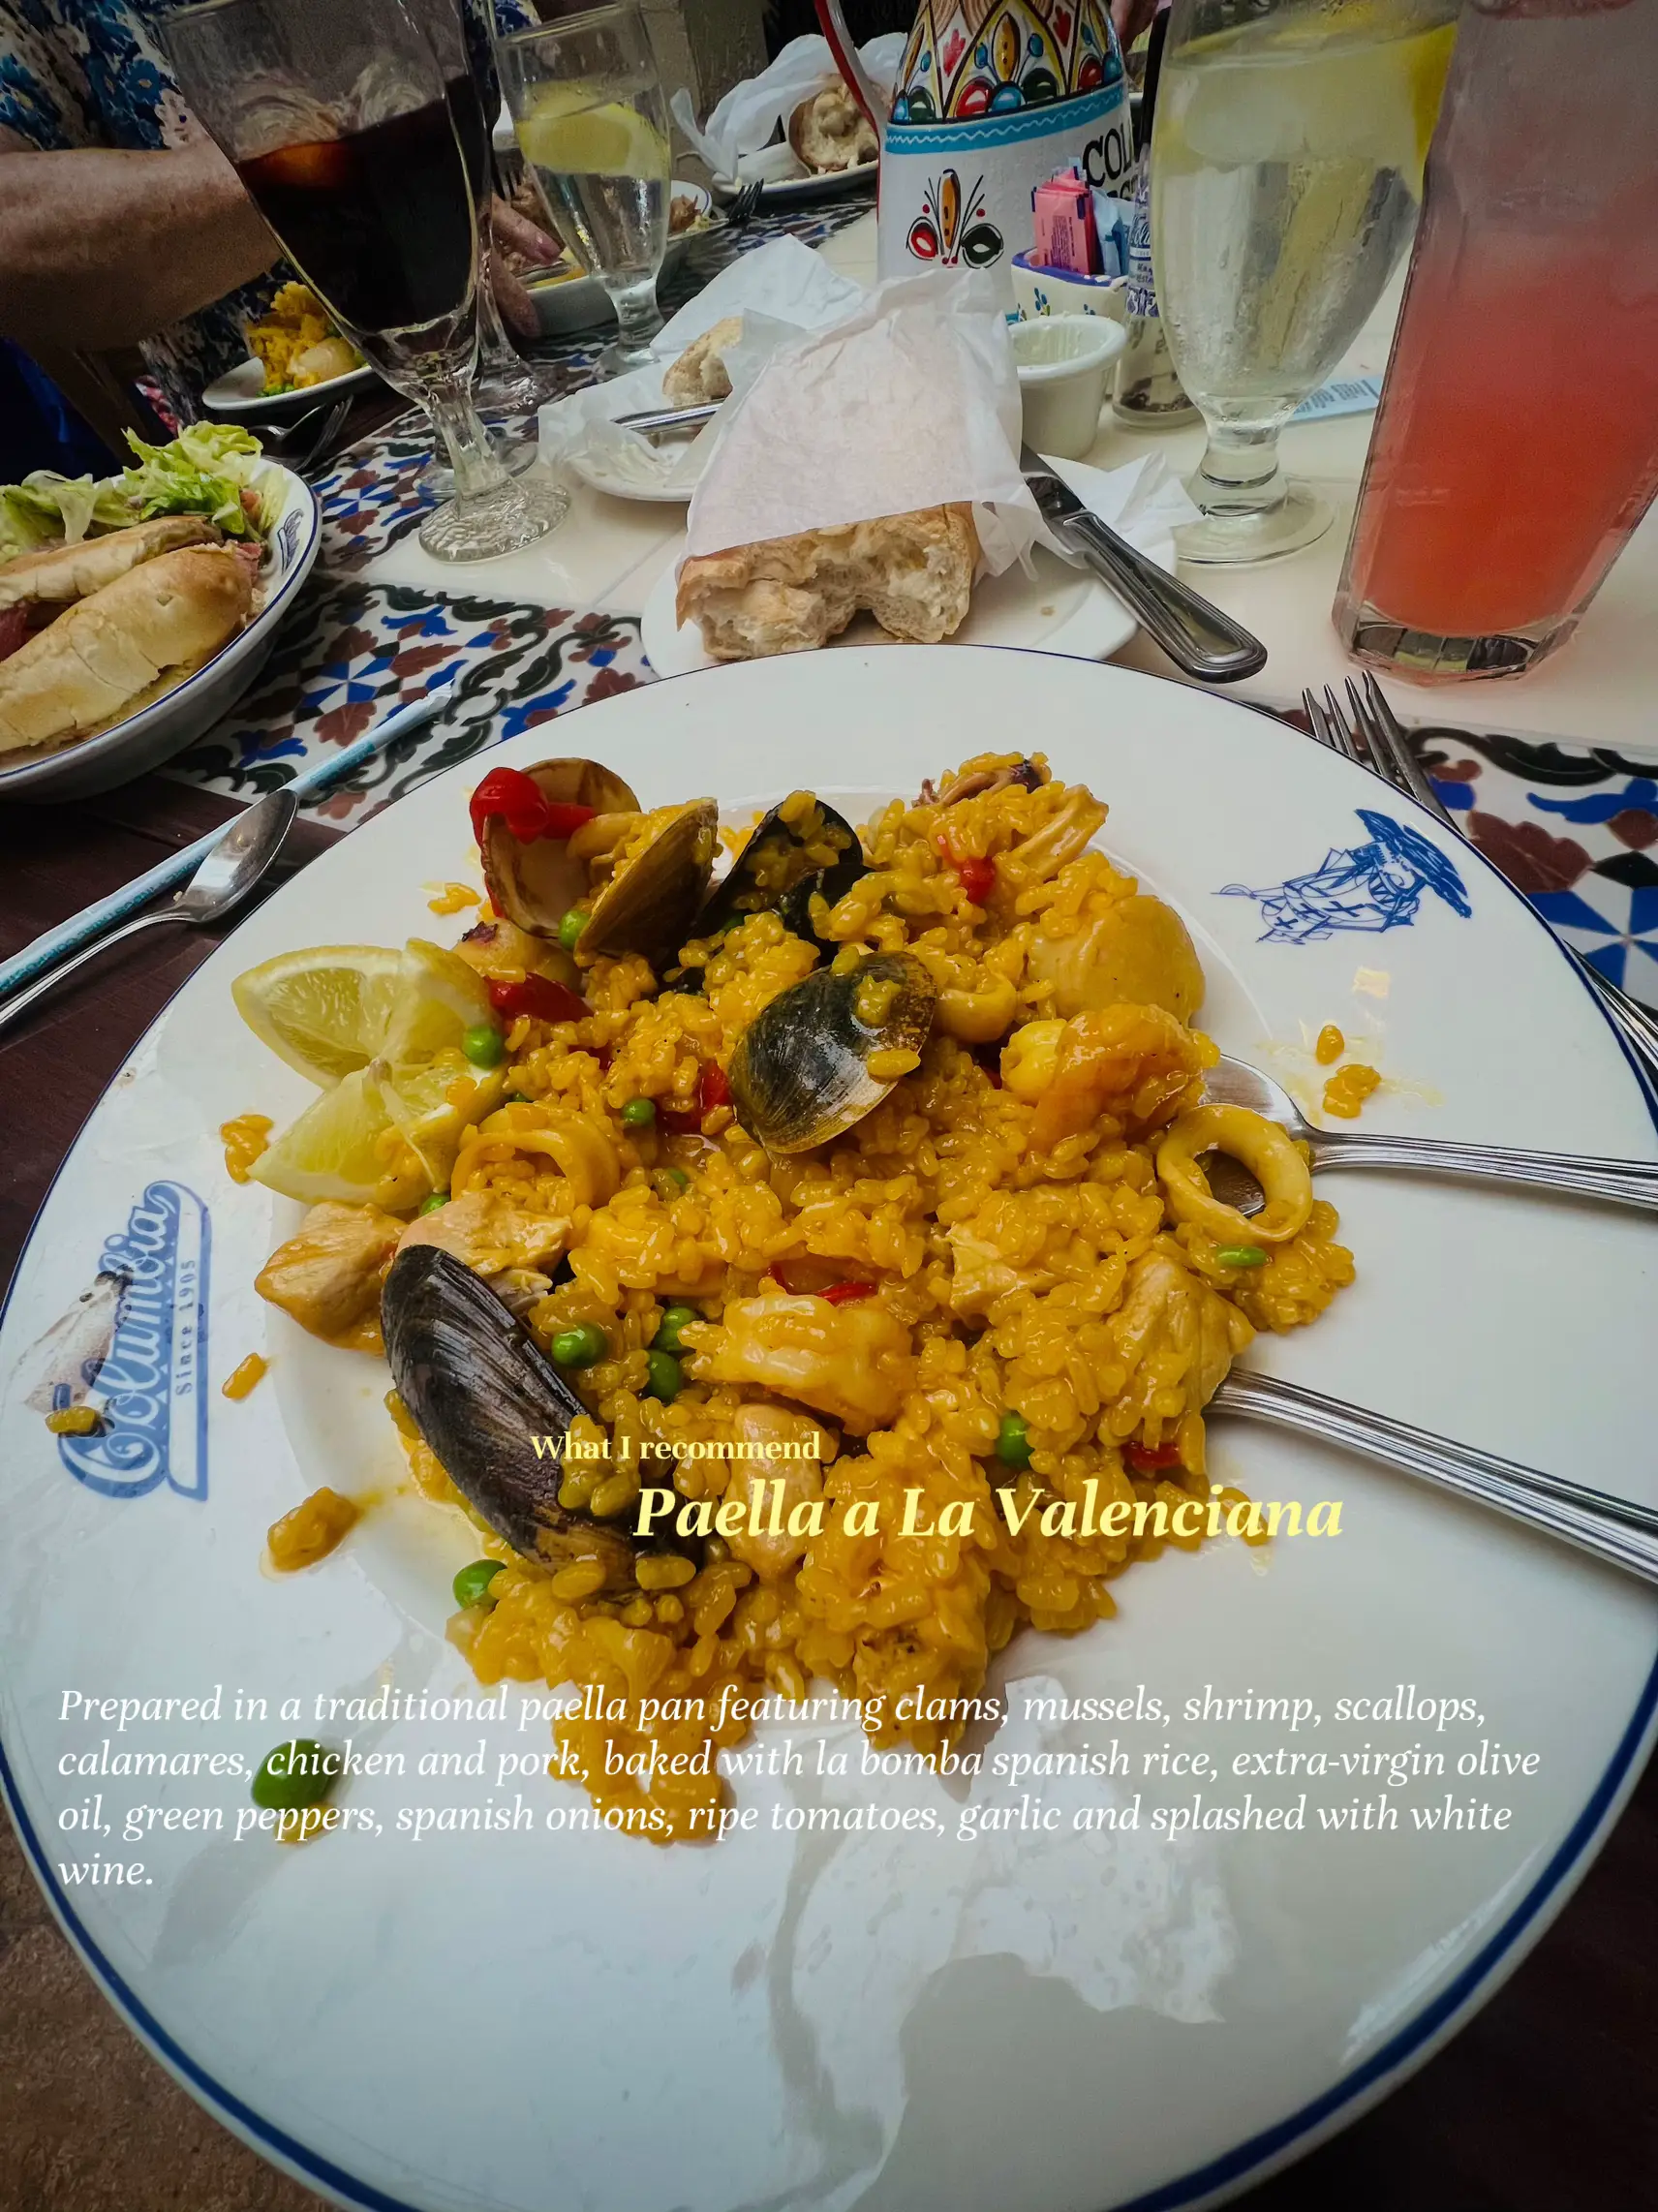 Columbia Restaurant Paella Recipe: Step by Step Guide  